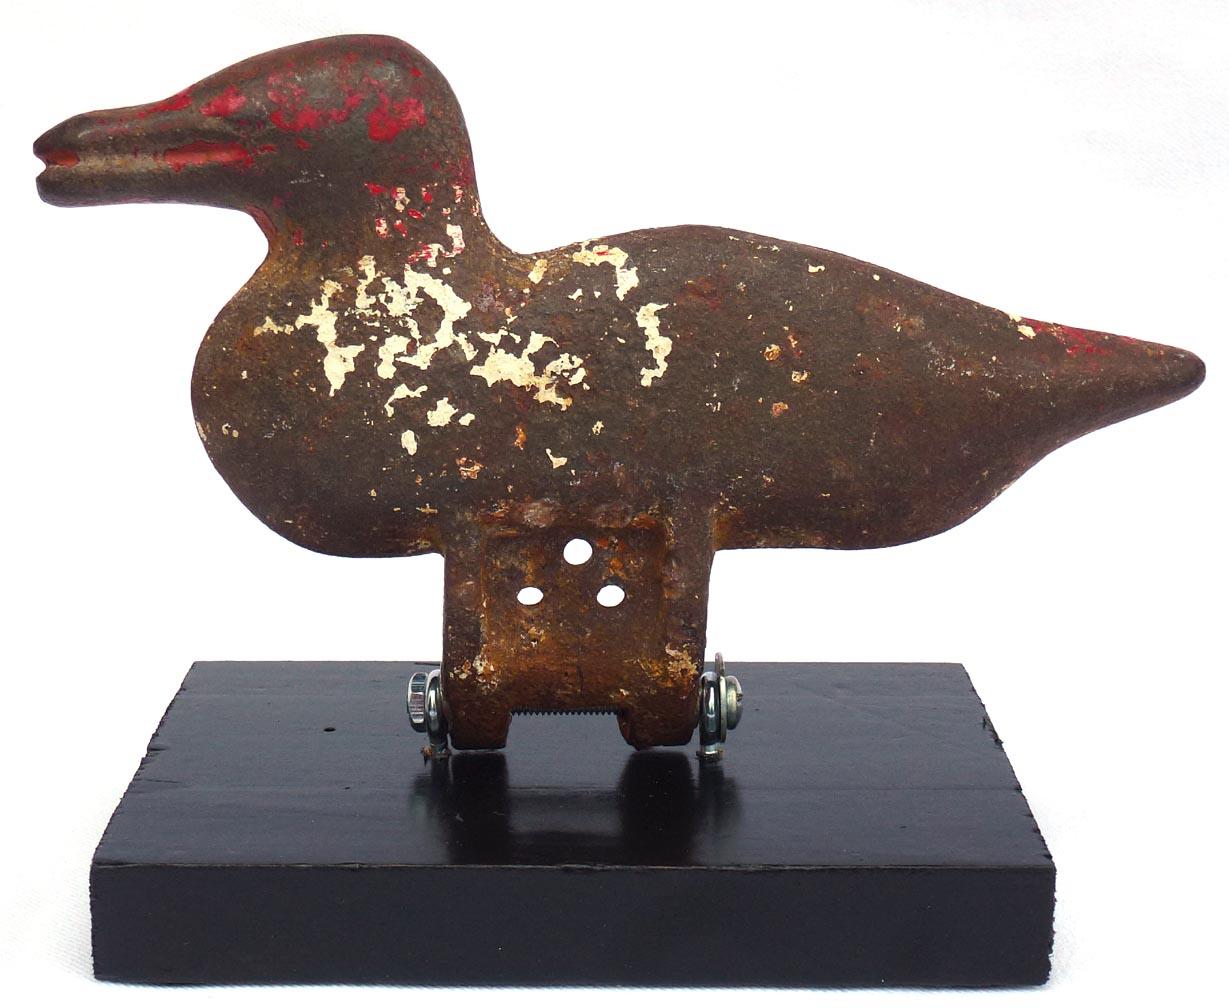 Here are two cast iron duck shooting gallery targets. They have dark oxidized surfaces with worn remnants of red and white paint. Each has been mounted on a wood display base. The ducks are 7 1/2